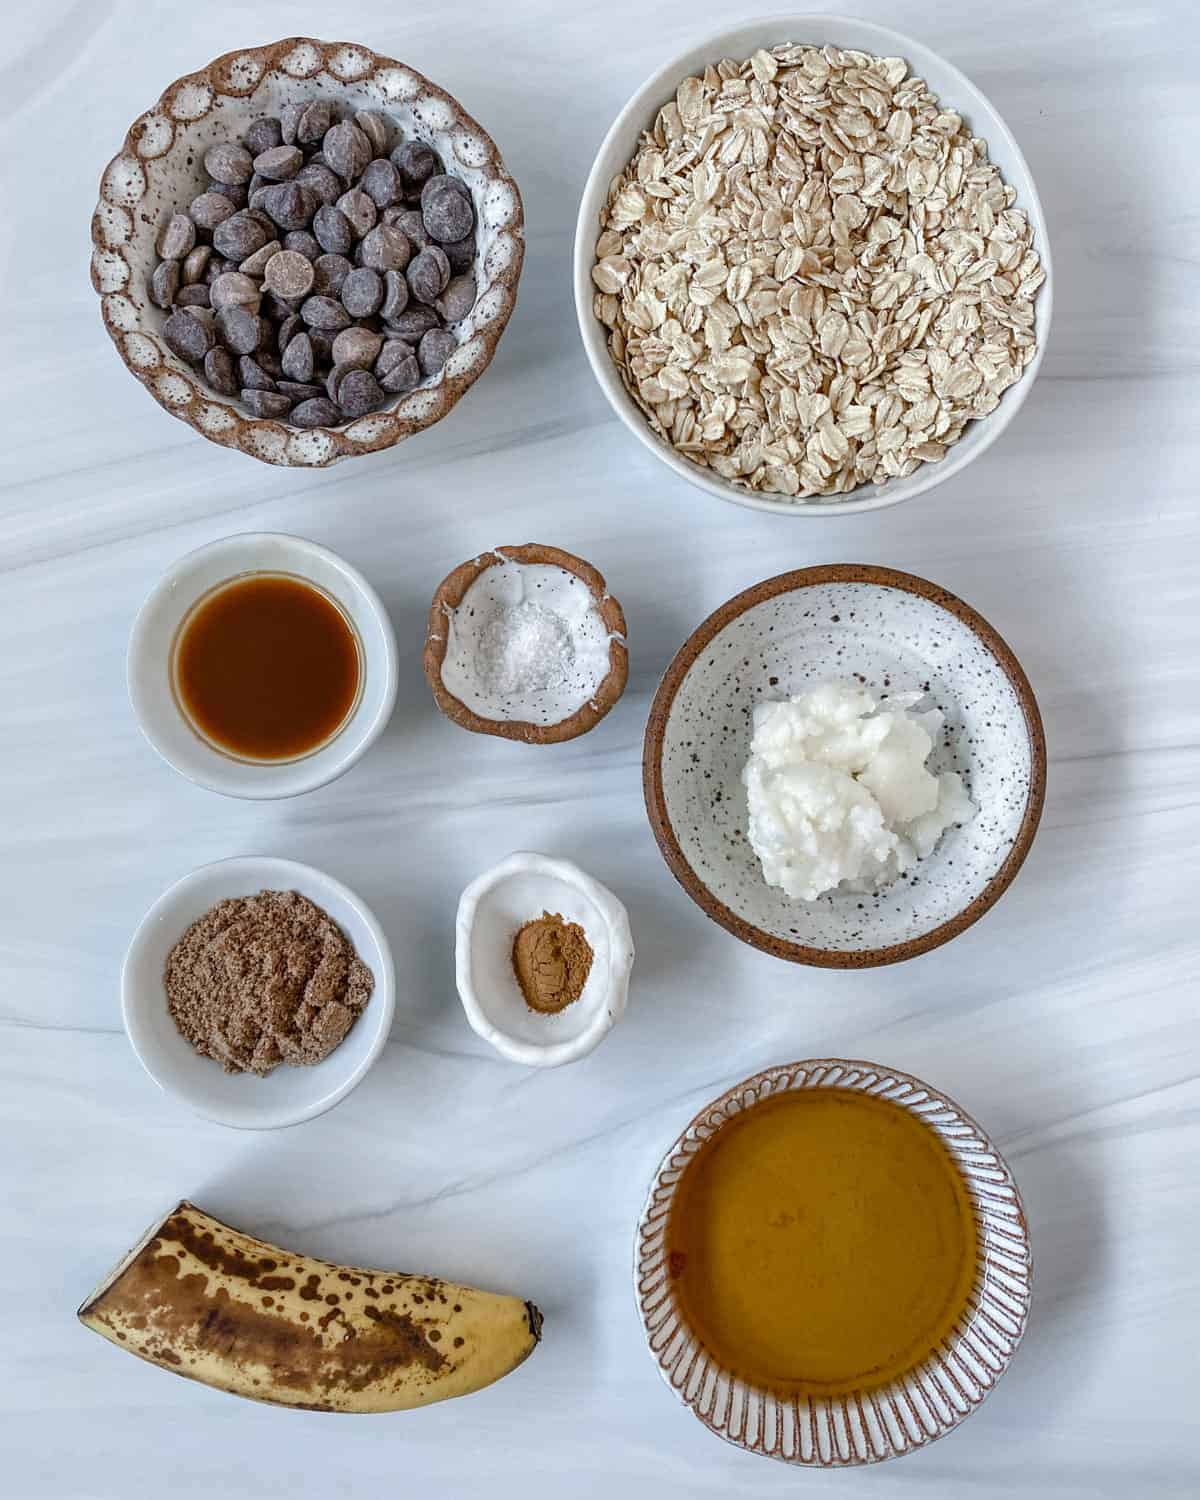 measured out ingredients for Chocolate Chip Banana Bites against a white surface